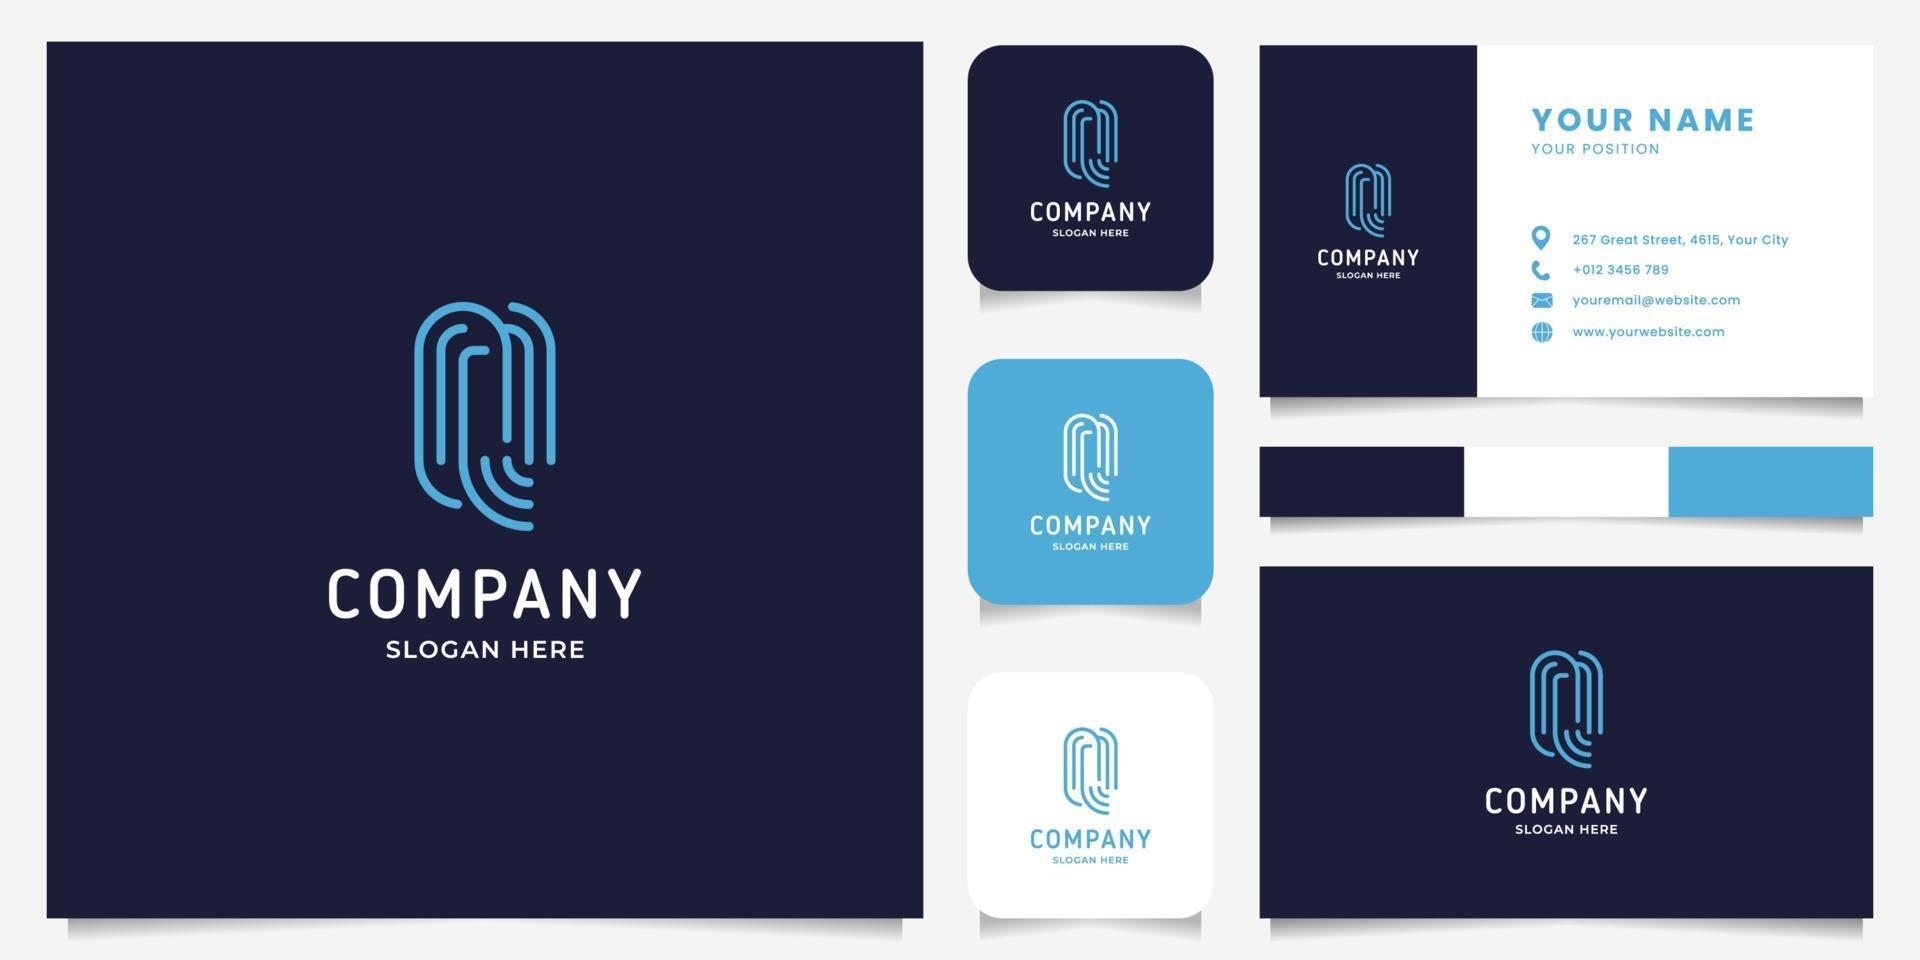 Simple and Minimalist Line Art Letter Q Logo with Business Card Template vector